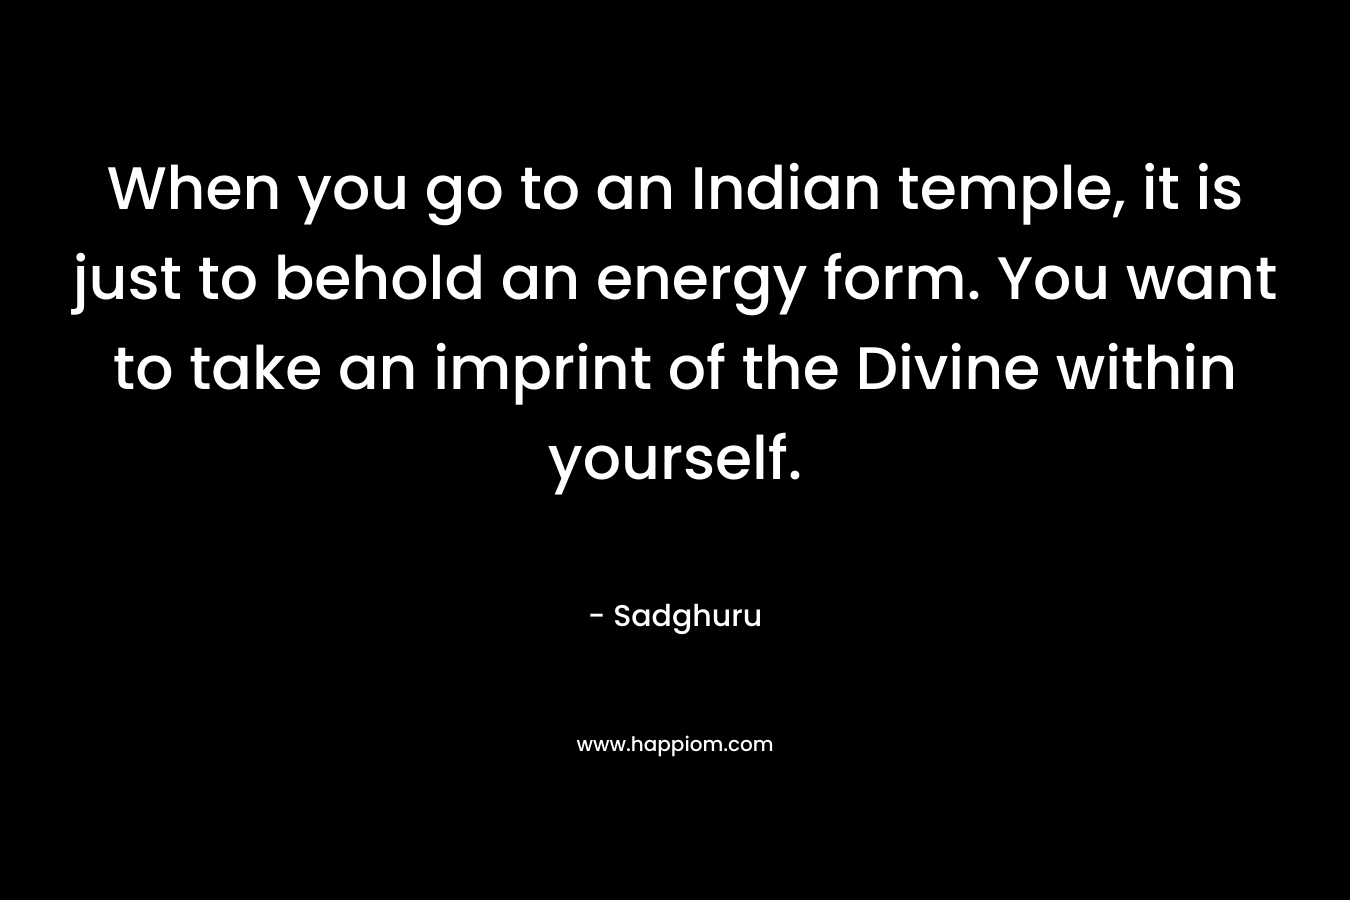 When you go to an Indian temple, it is just to behold an energy form. You want to take an imprint of the Divine within yourself. – Sadghuru